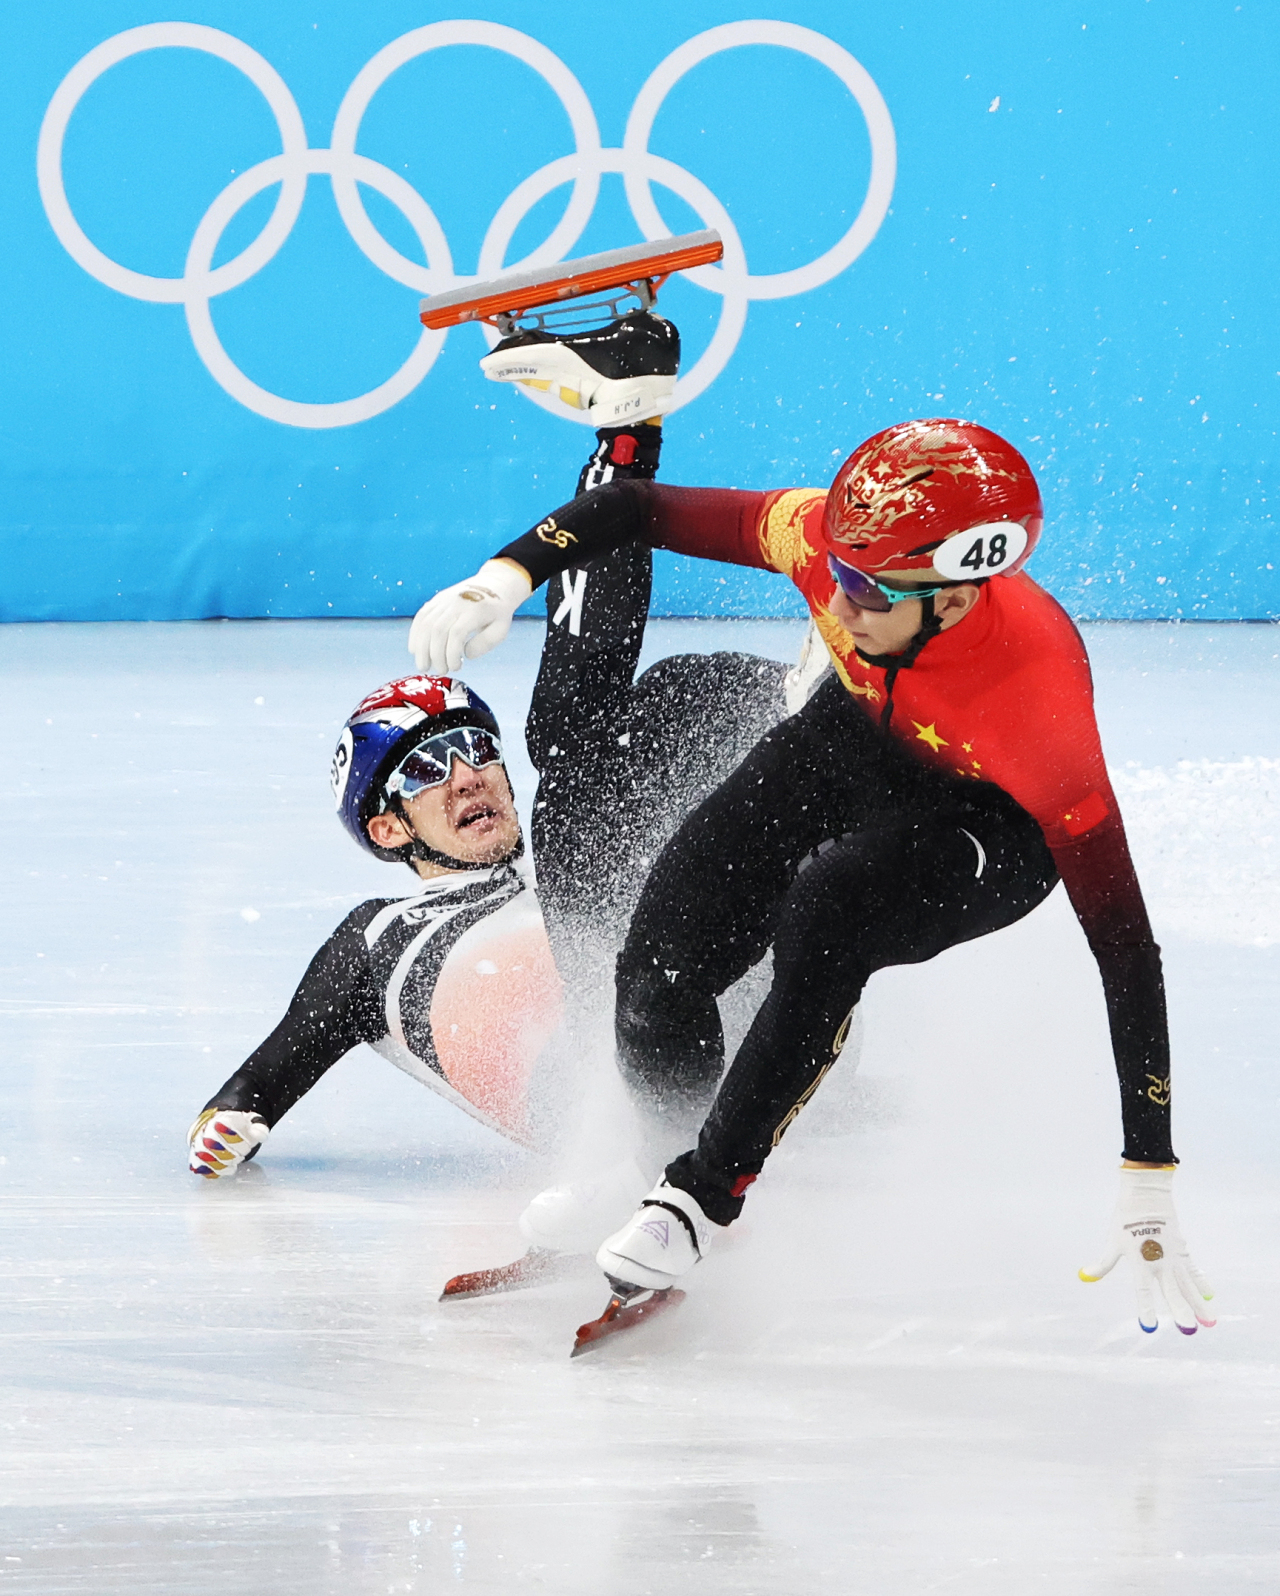 Park Jang-hyuk of South Korea (L) is down on the ice after a fall as Wu Dajing of China hits him with a skate during the quarterfinals of the men's 1,000m short track speed skating race at the Beijing Winter Olympics at Capital Indoor Stadium in Beijing on Monday. (Yonhap)